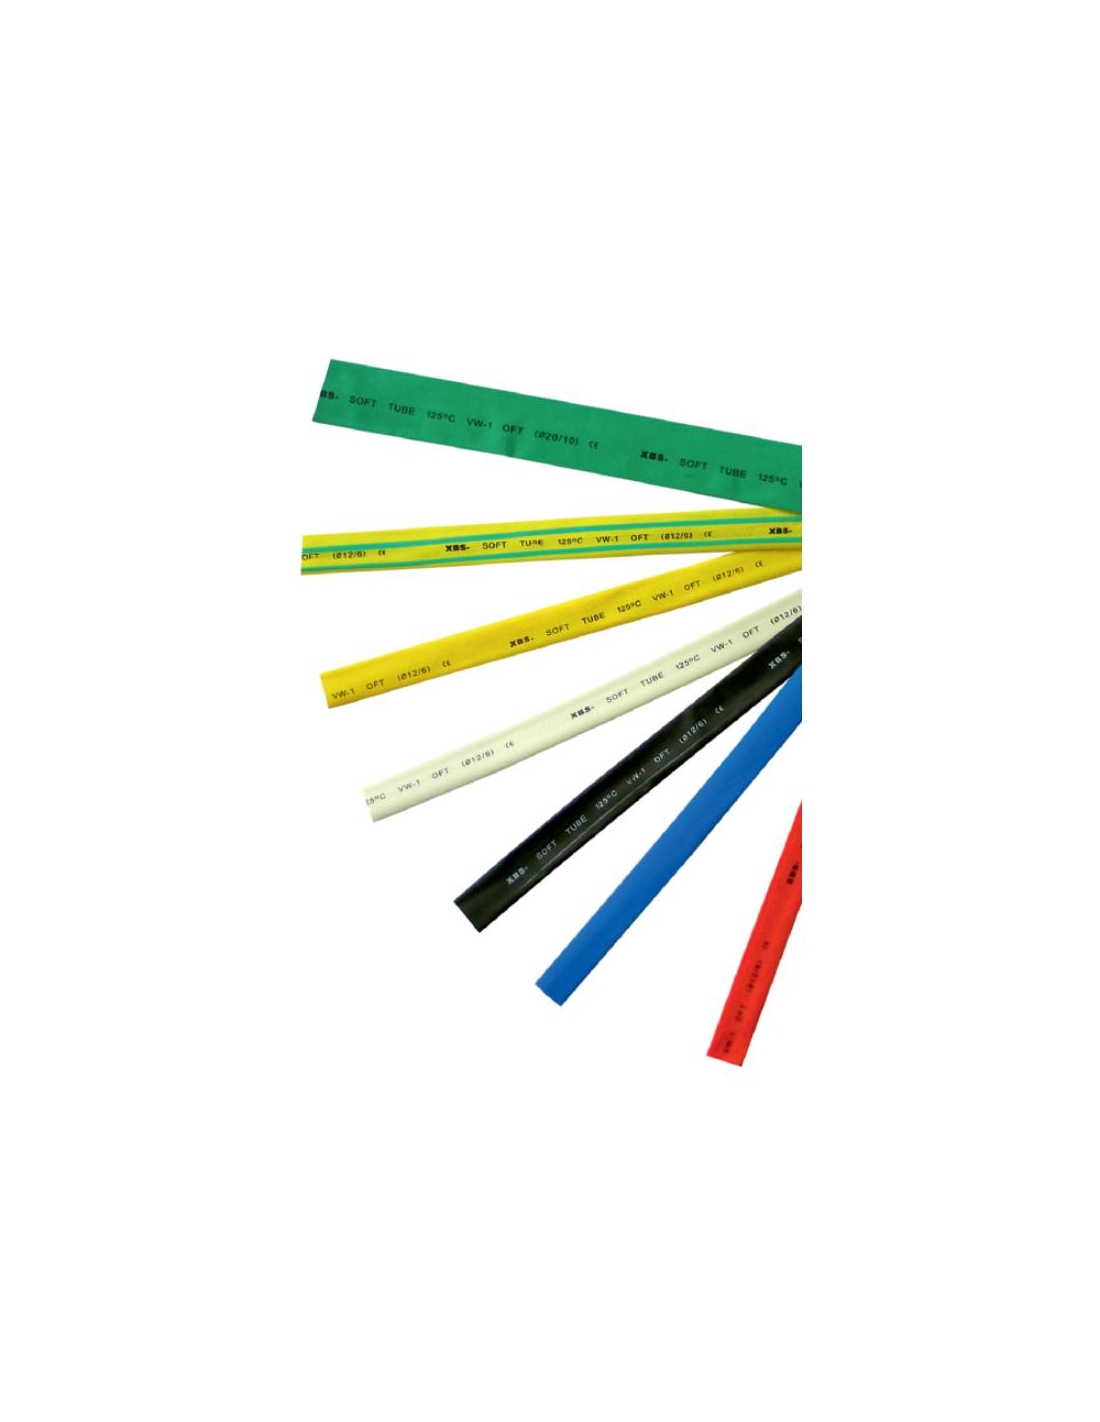 50 FT 50' Feet CLEAR 3/4" 19mm Polyolefin 2:1 Heat Shrink Tubing Tube Cable US 